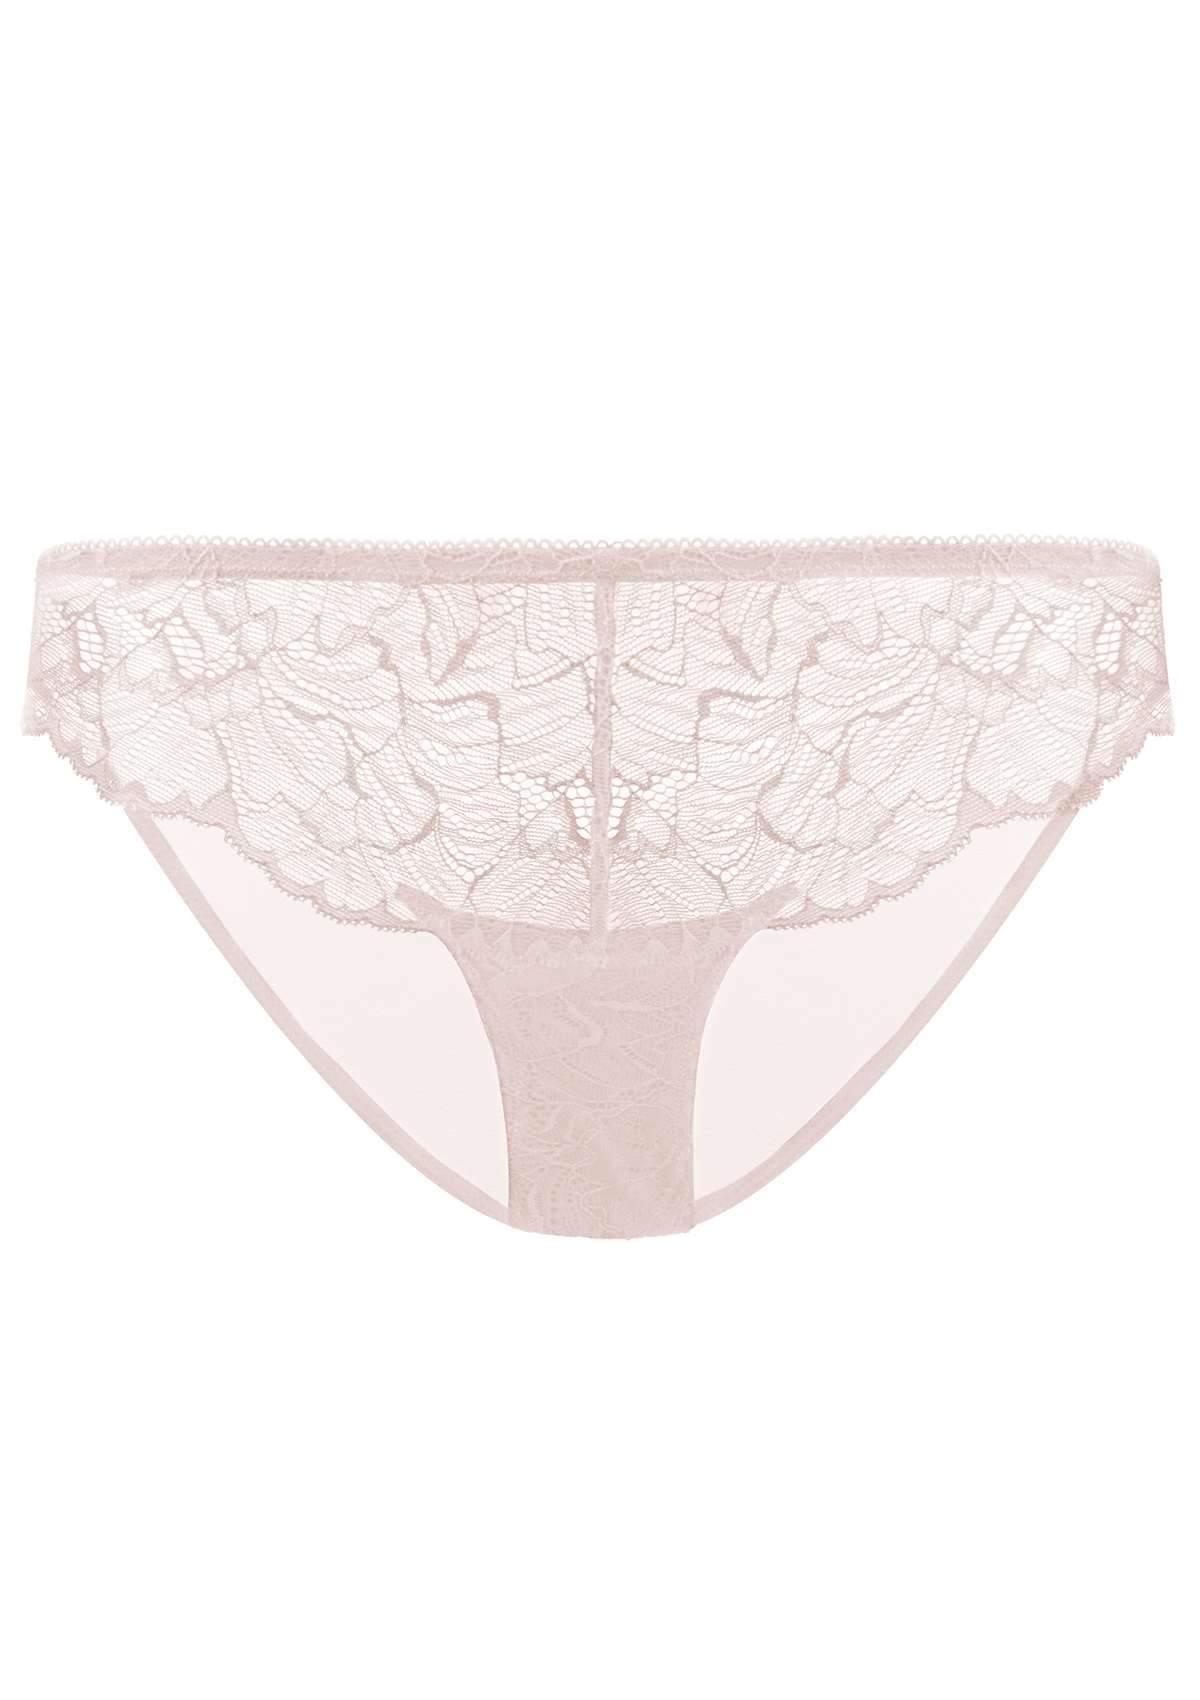 HSIA Blossom Mid-Rise Front Lace Mesh Back Everyday Pantie  - M / Dark Pink / High-Rise Brief